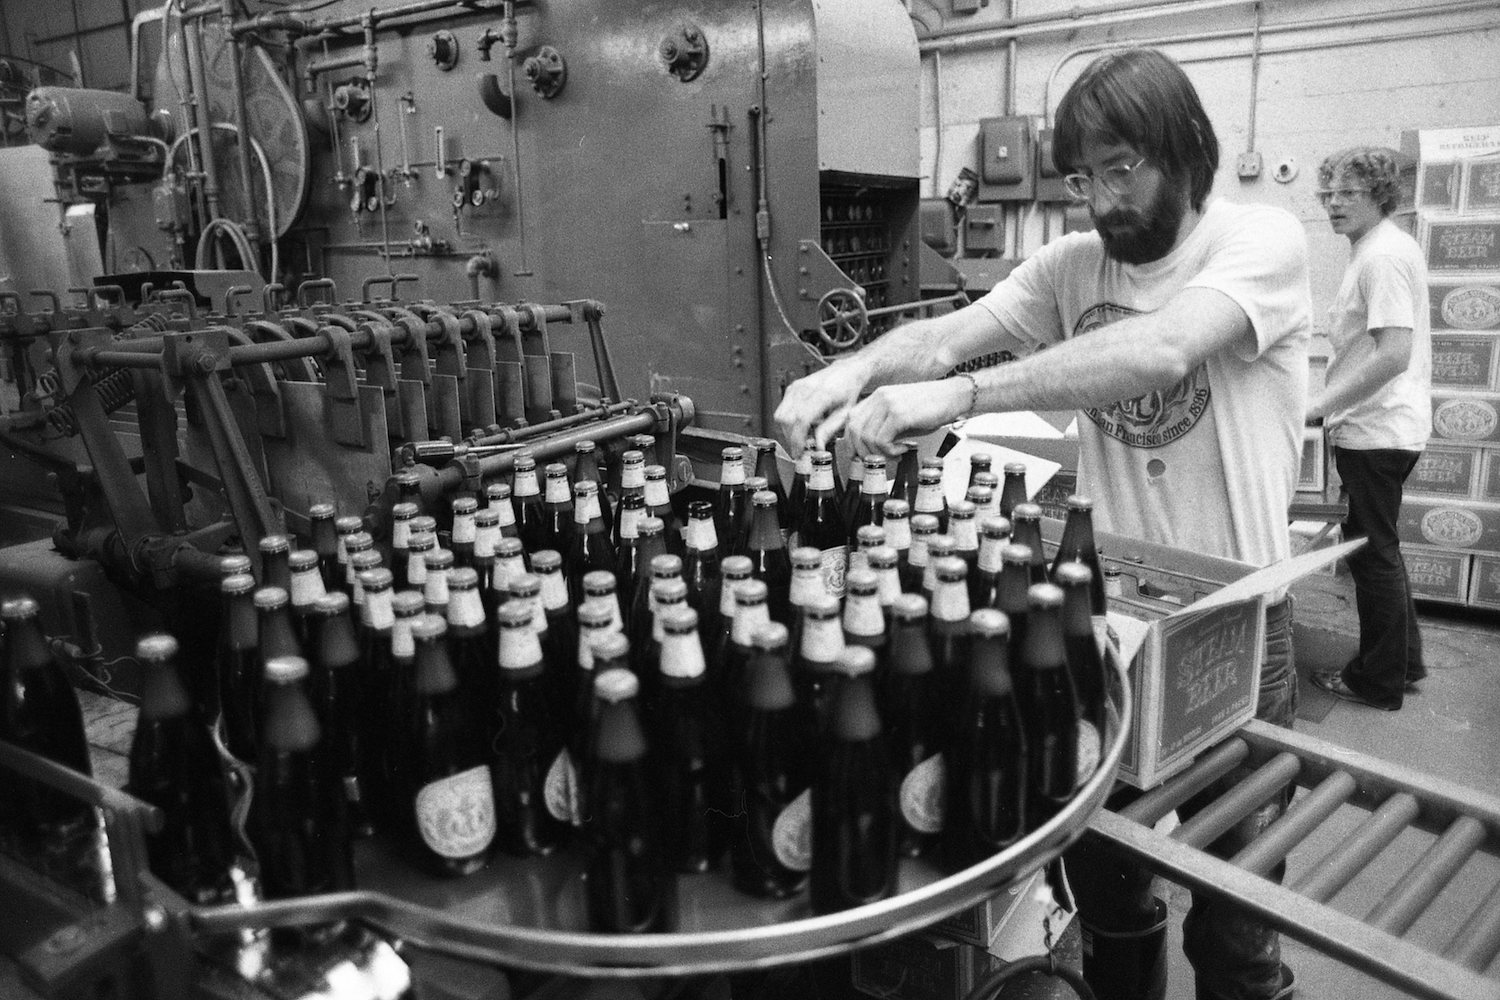 Boxing up the bottles beer at Anchor Steam Beer Brewery, March 28, 1978.